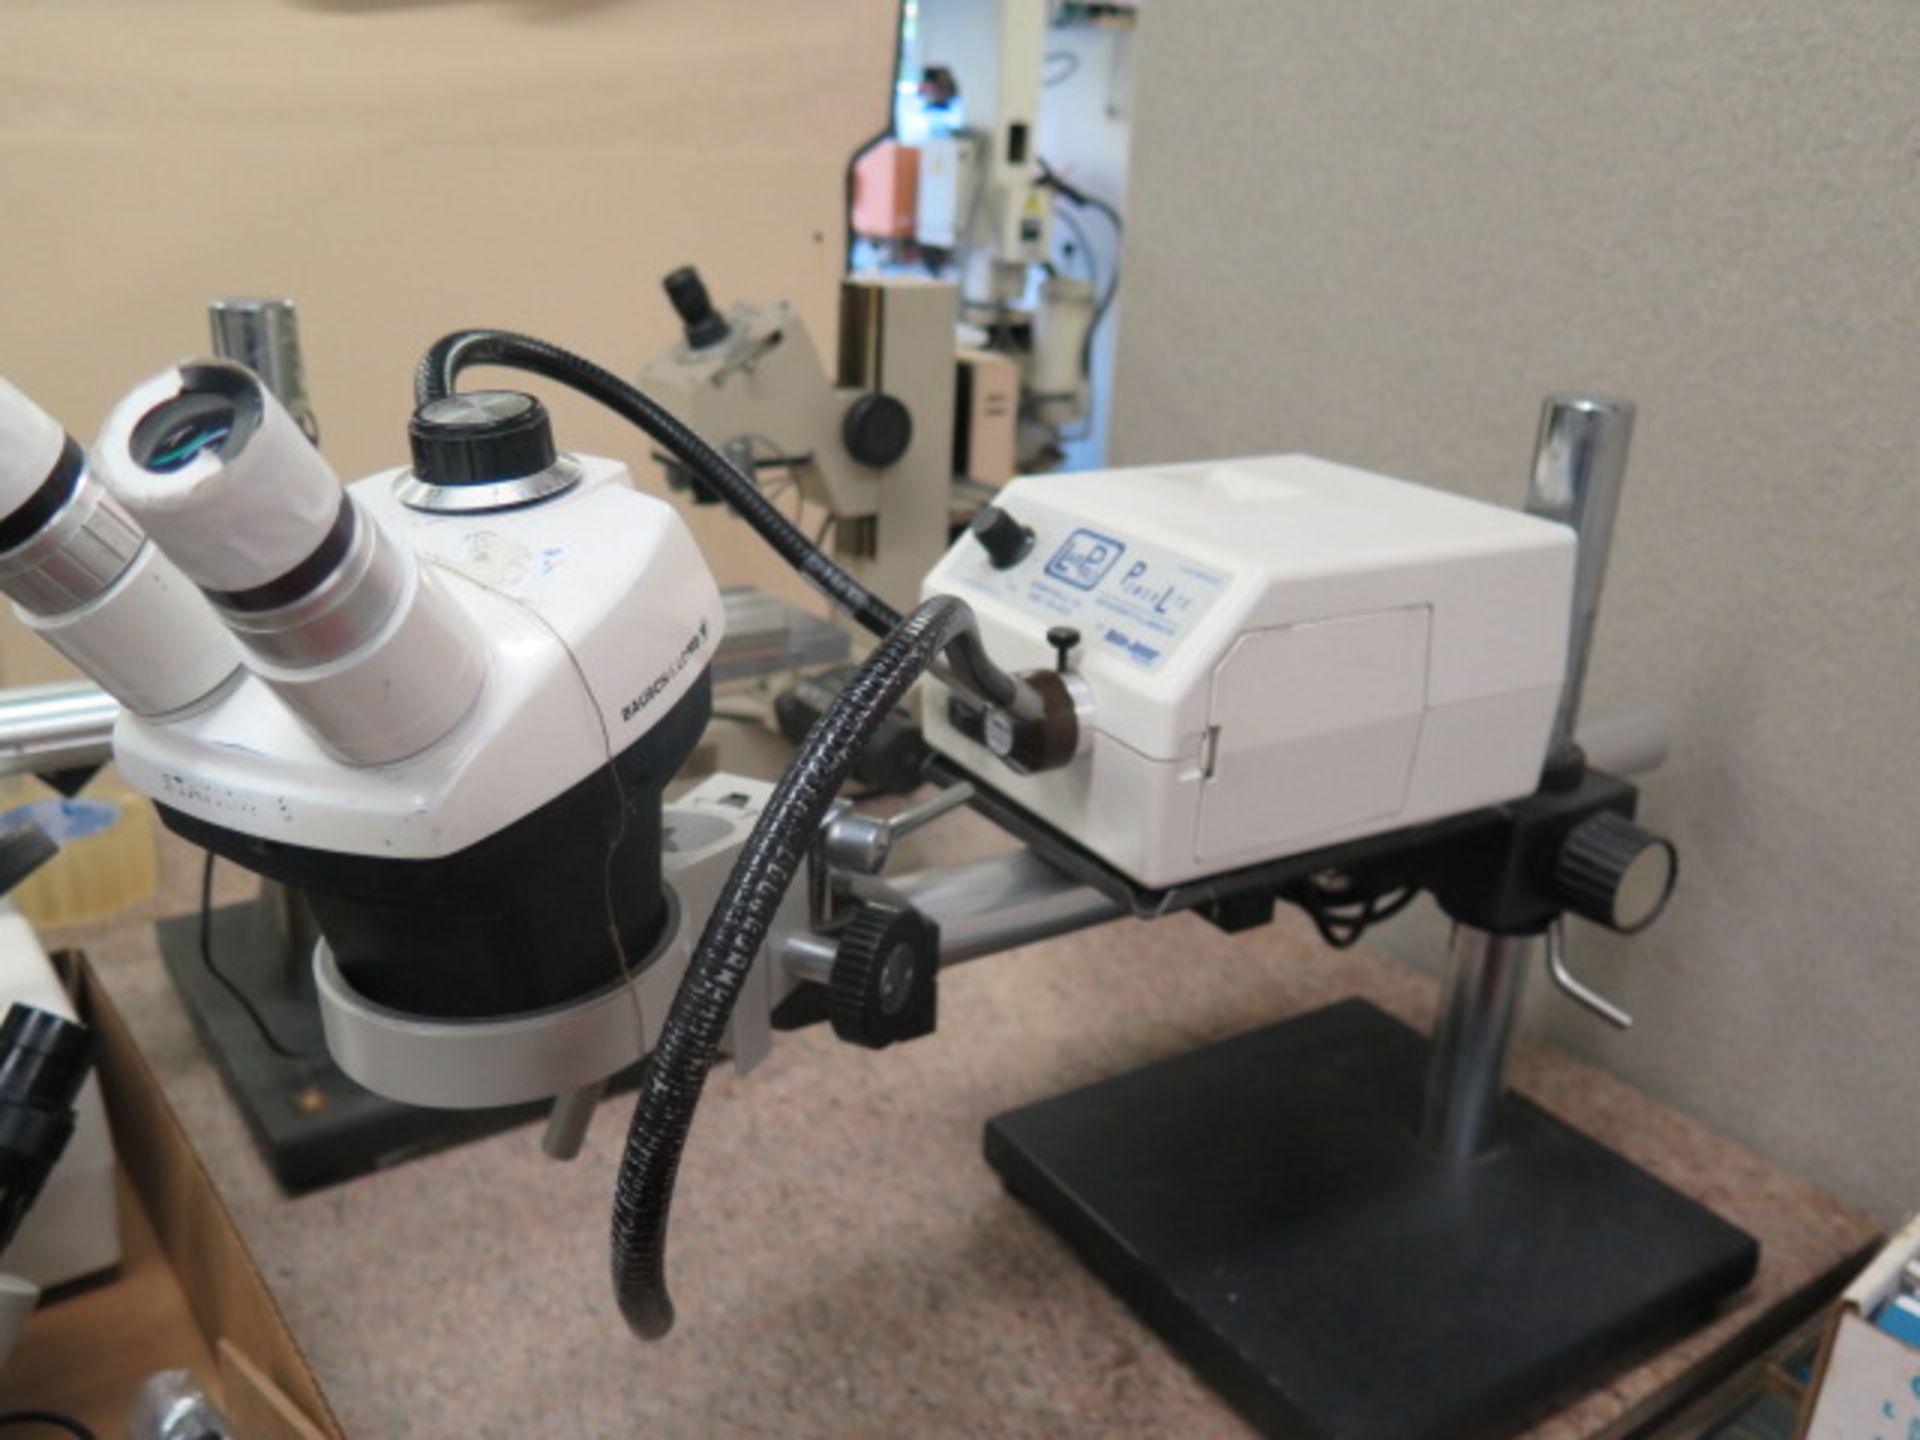 Bausch & Lomb Stereo Microscope w/ Fiberoptic Light Source (SOLD AS-IS - NO WARRANTY) - Image 2 of 7